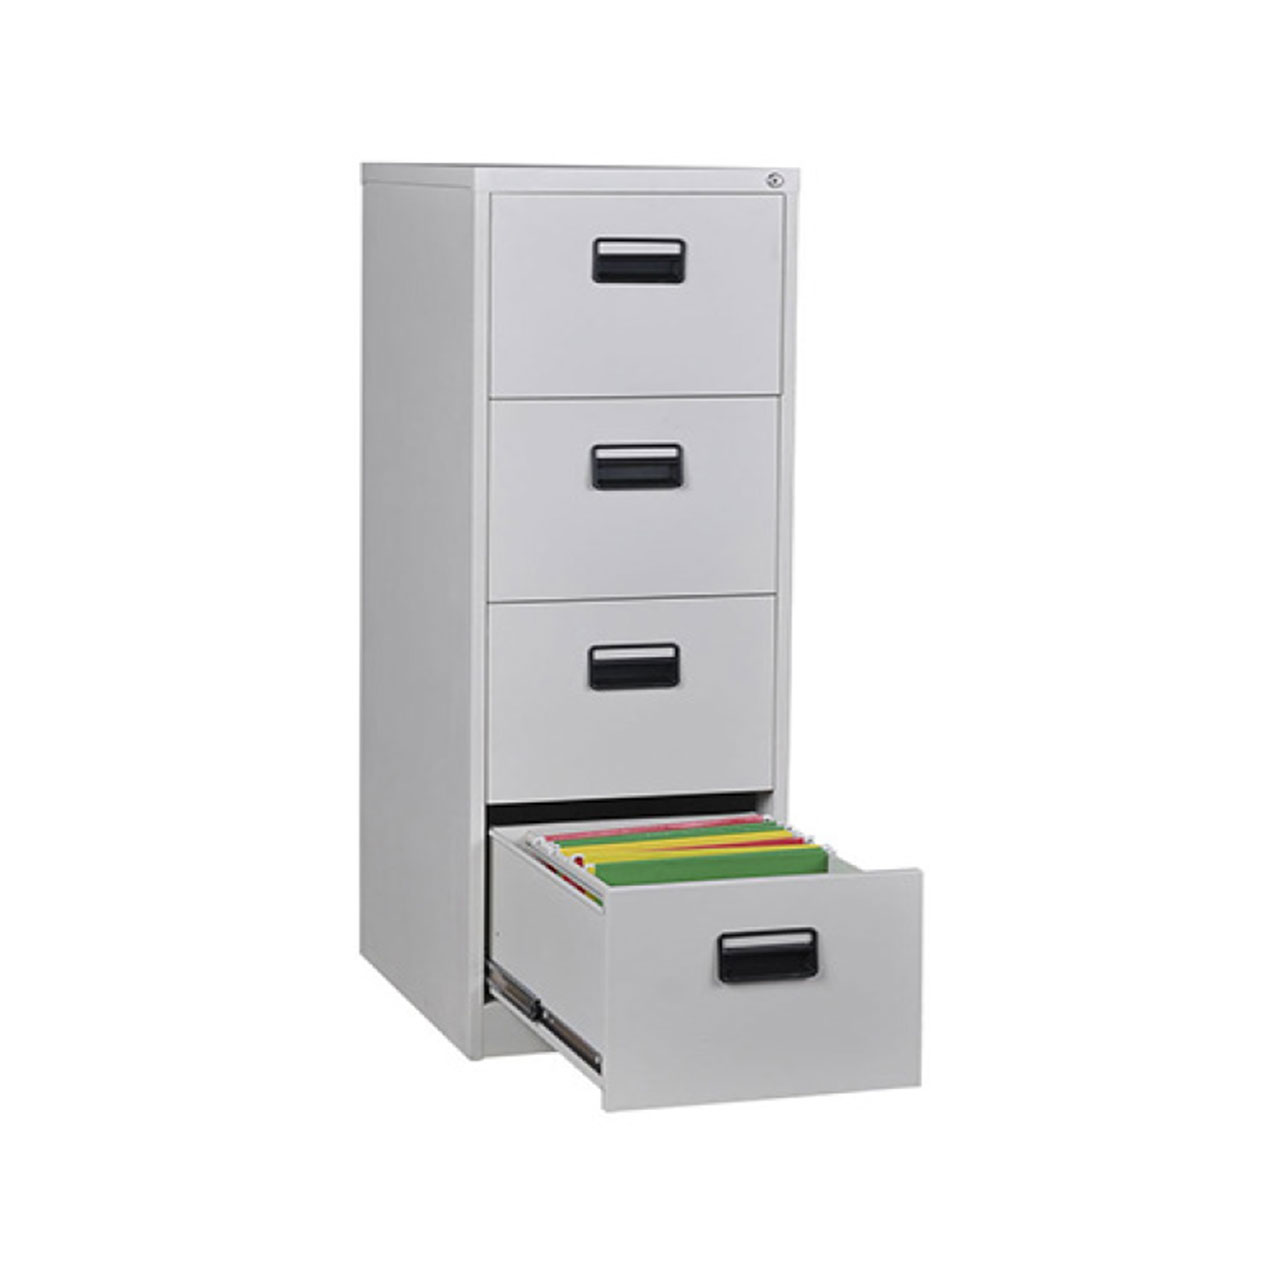 4 LAYER VERTICAL STEEL FILING CABINET 1 